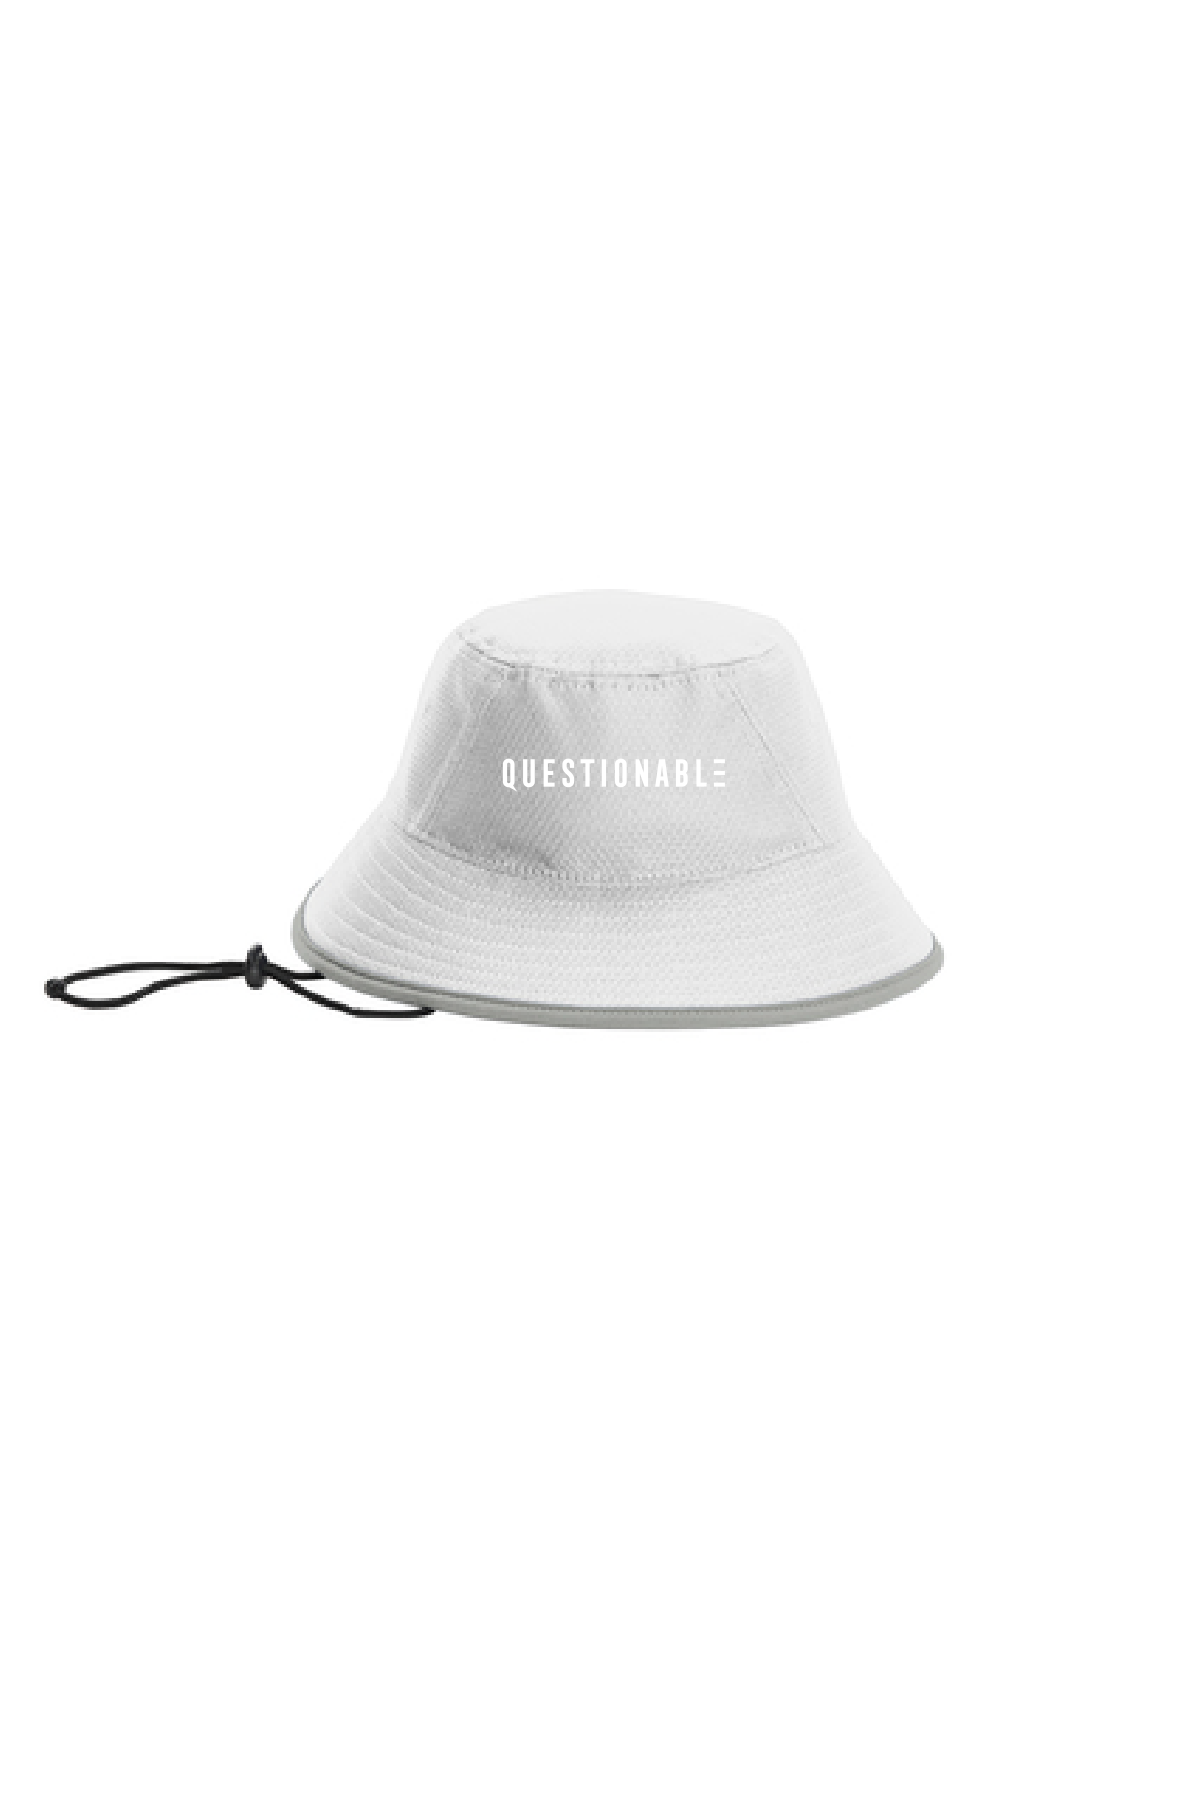 Questionable - Embroidered New Era Bucket Hat